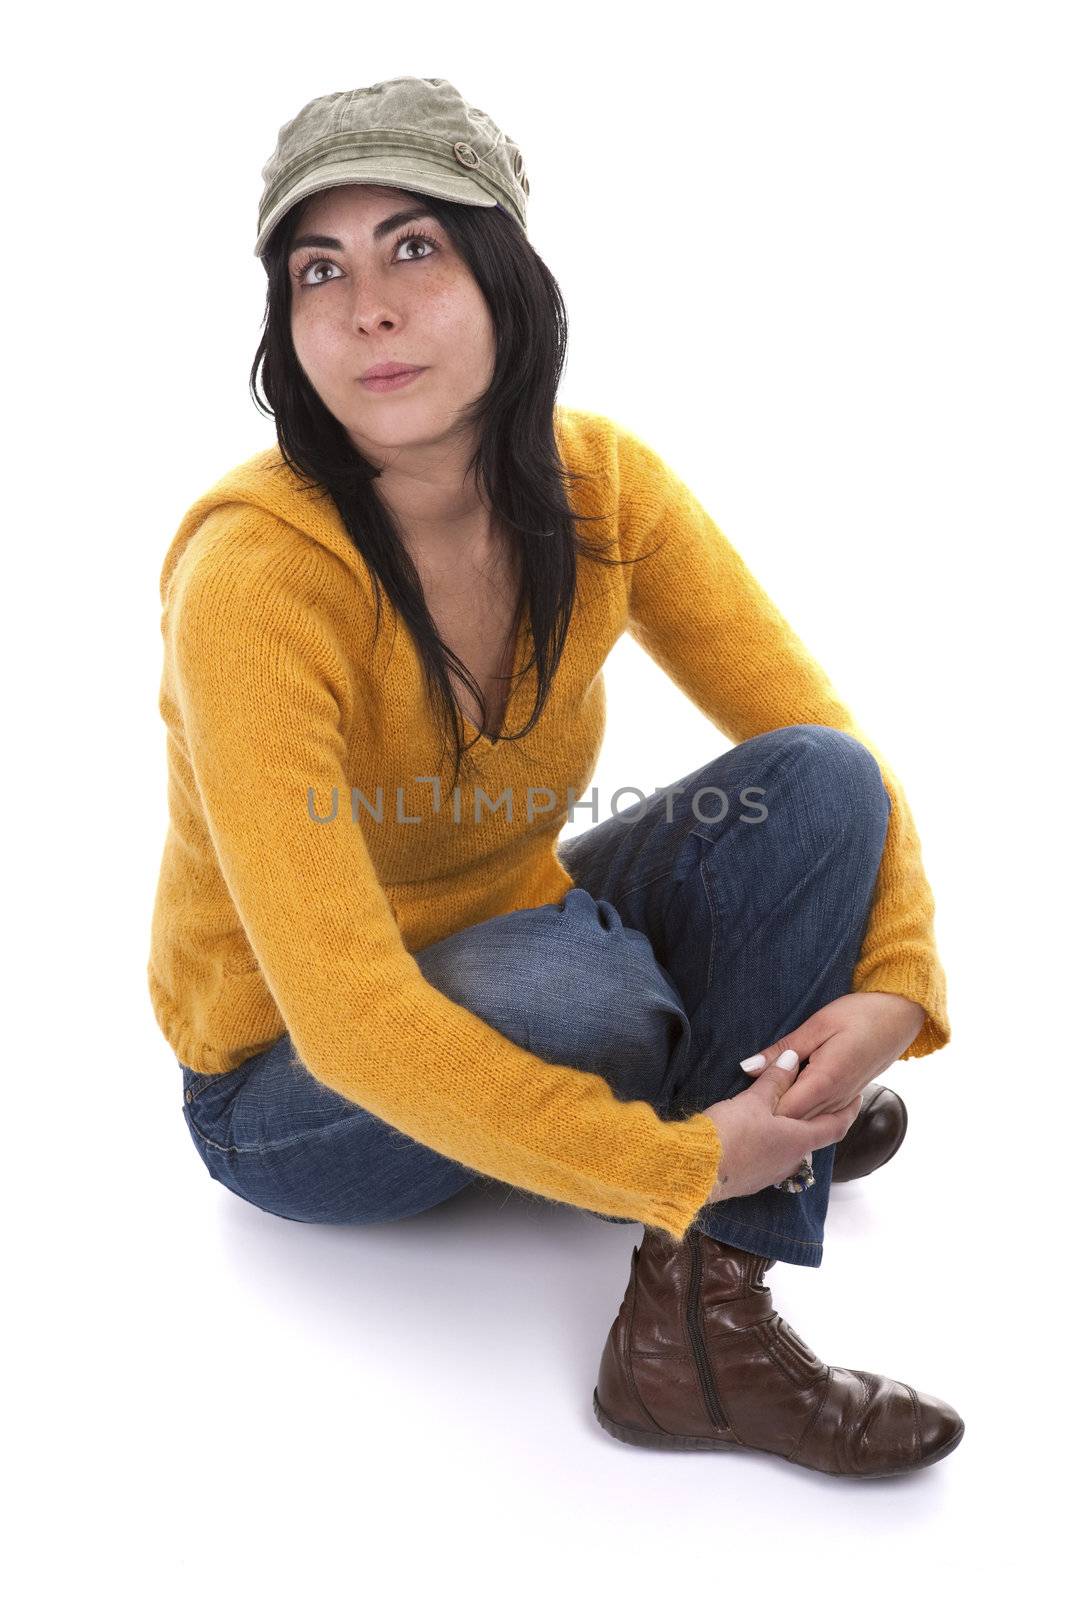 young casual woman with hat and yellow sweater - isolated on white background